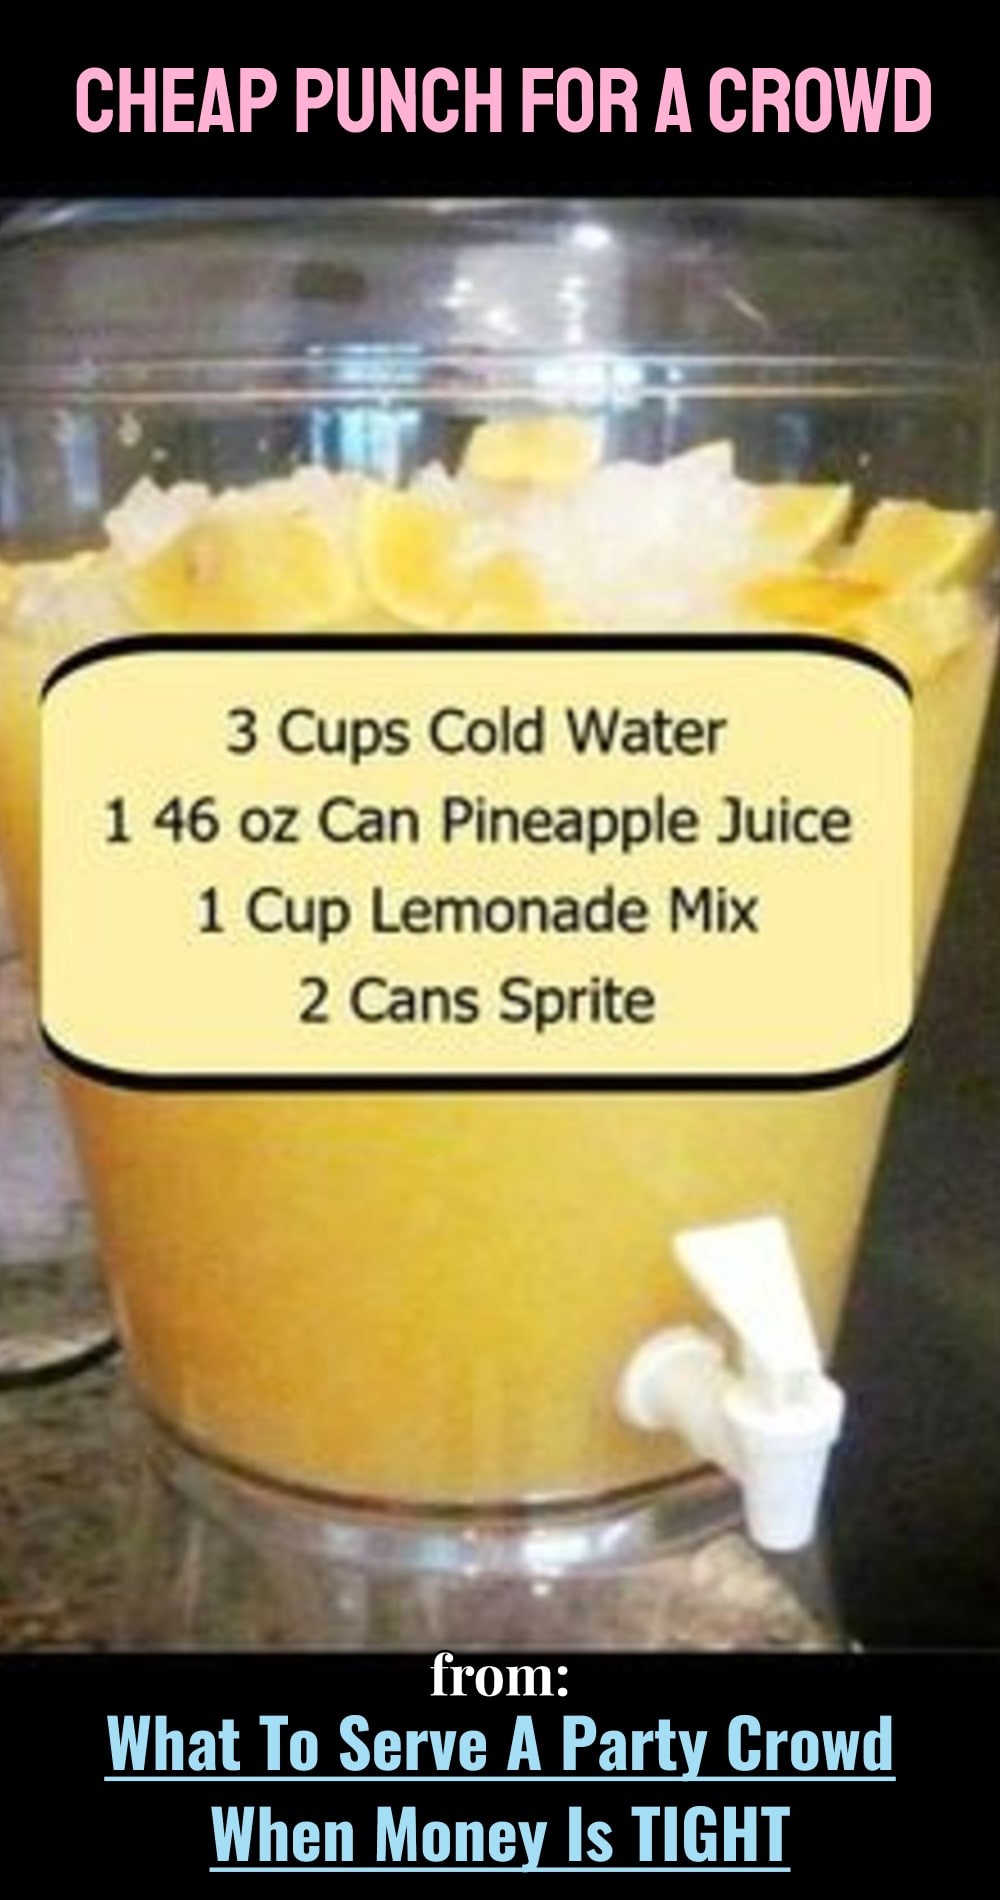 Inexpensive punch recipe for large groups